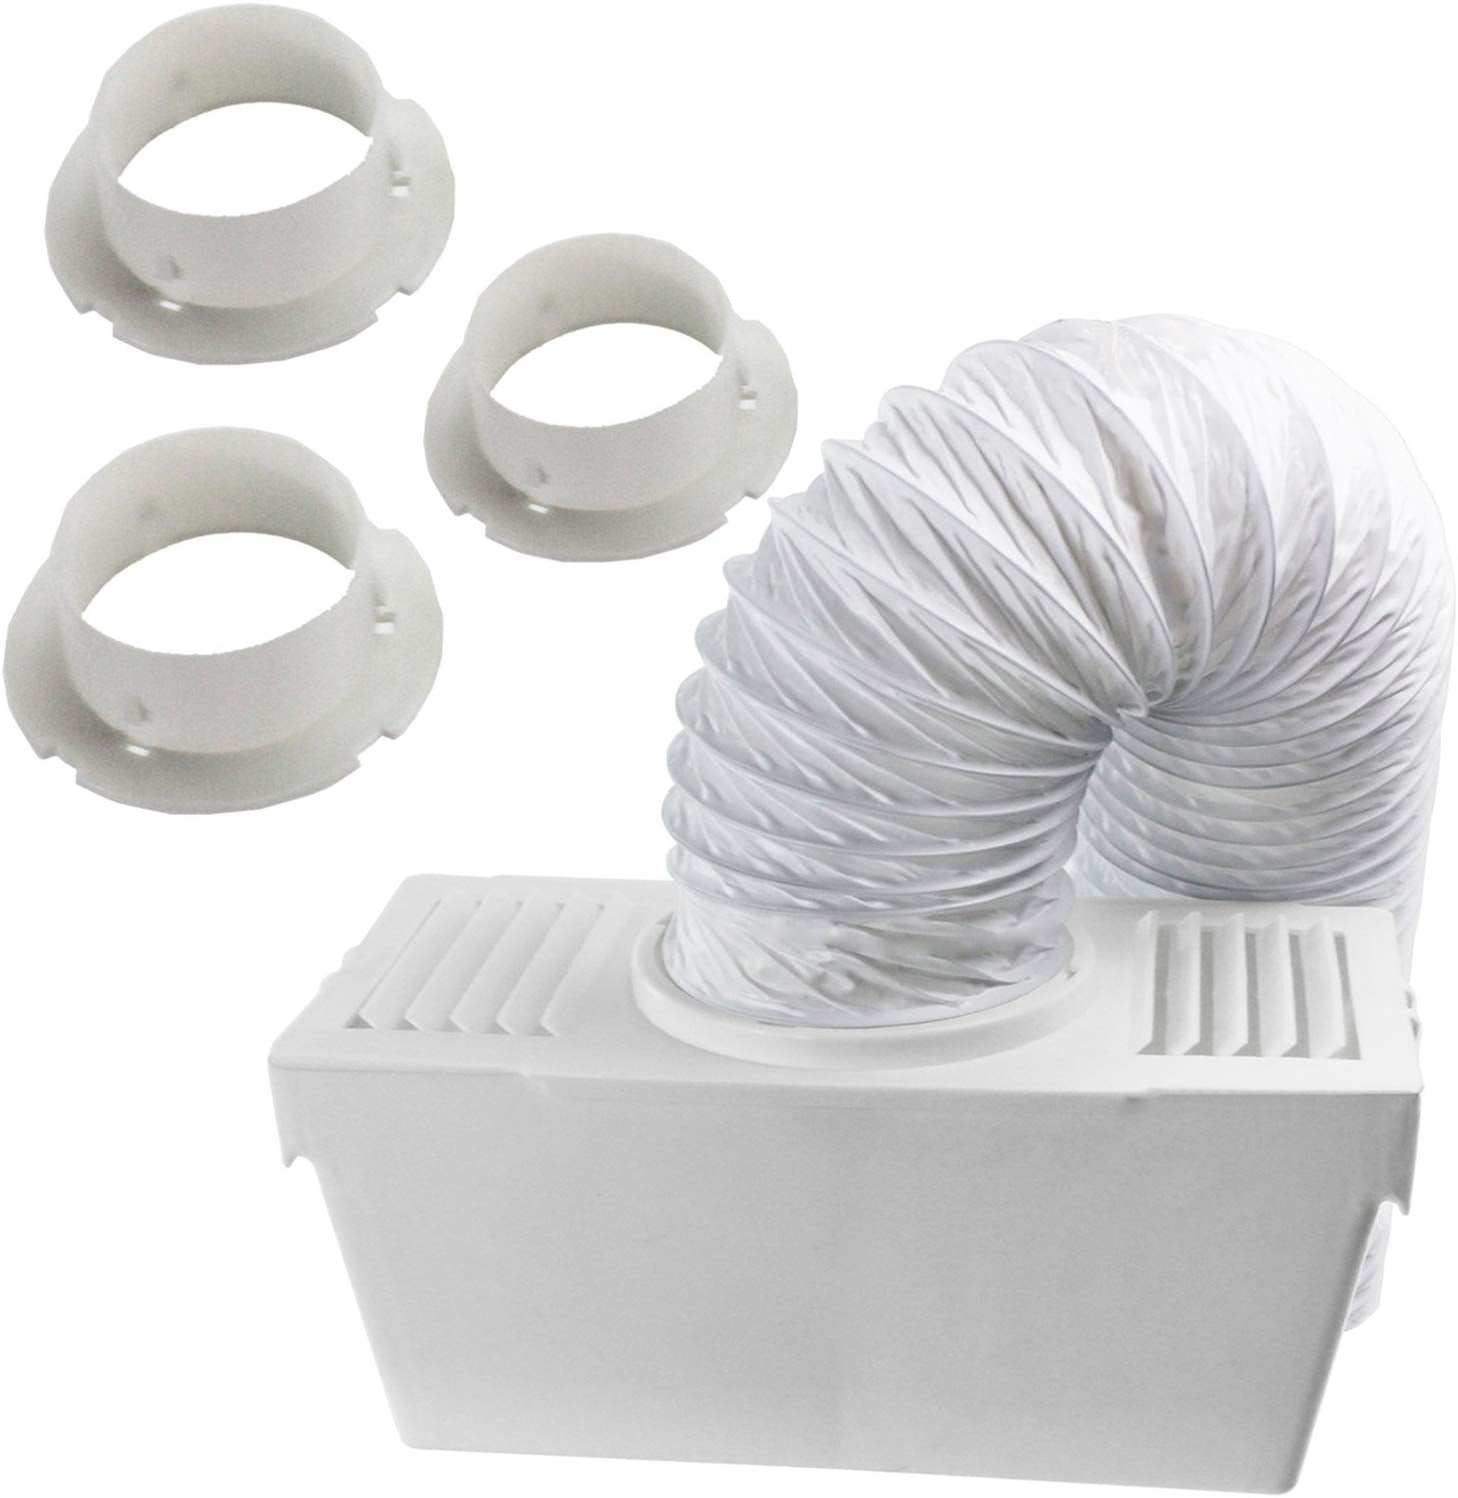 Vent Hose Condenser Kit with 3 x Adapters for White Knight Tumble Dryer (1.2m)